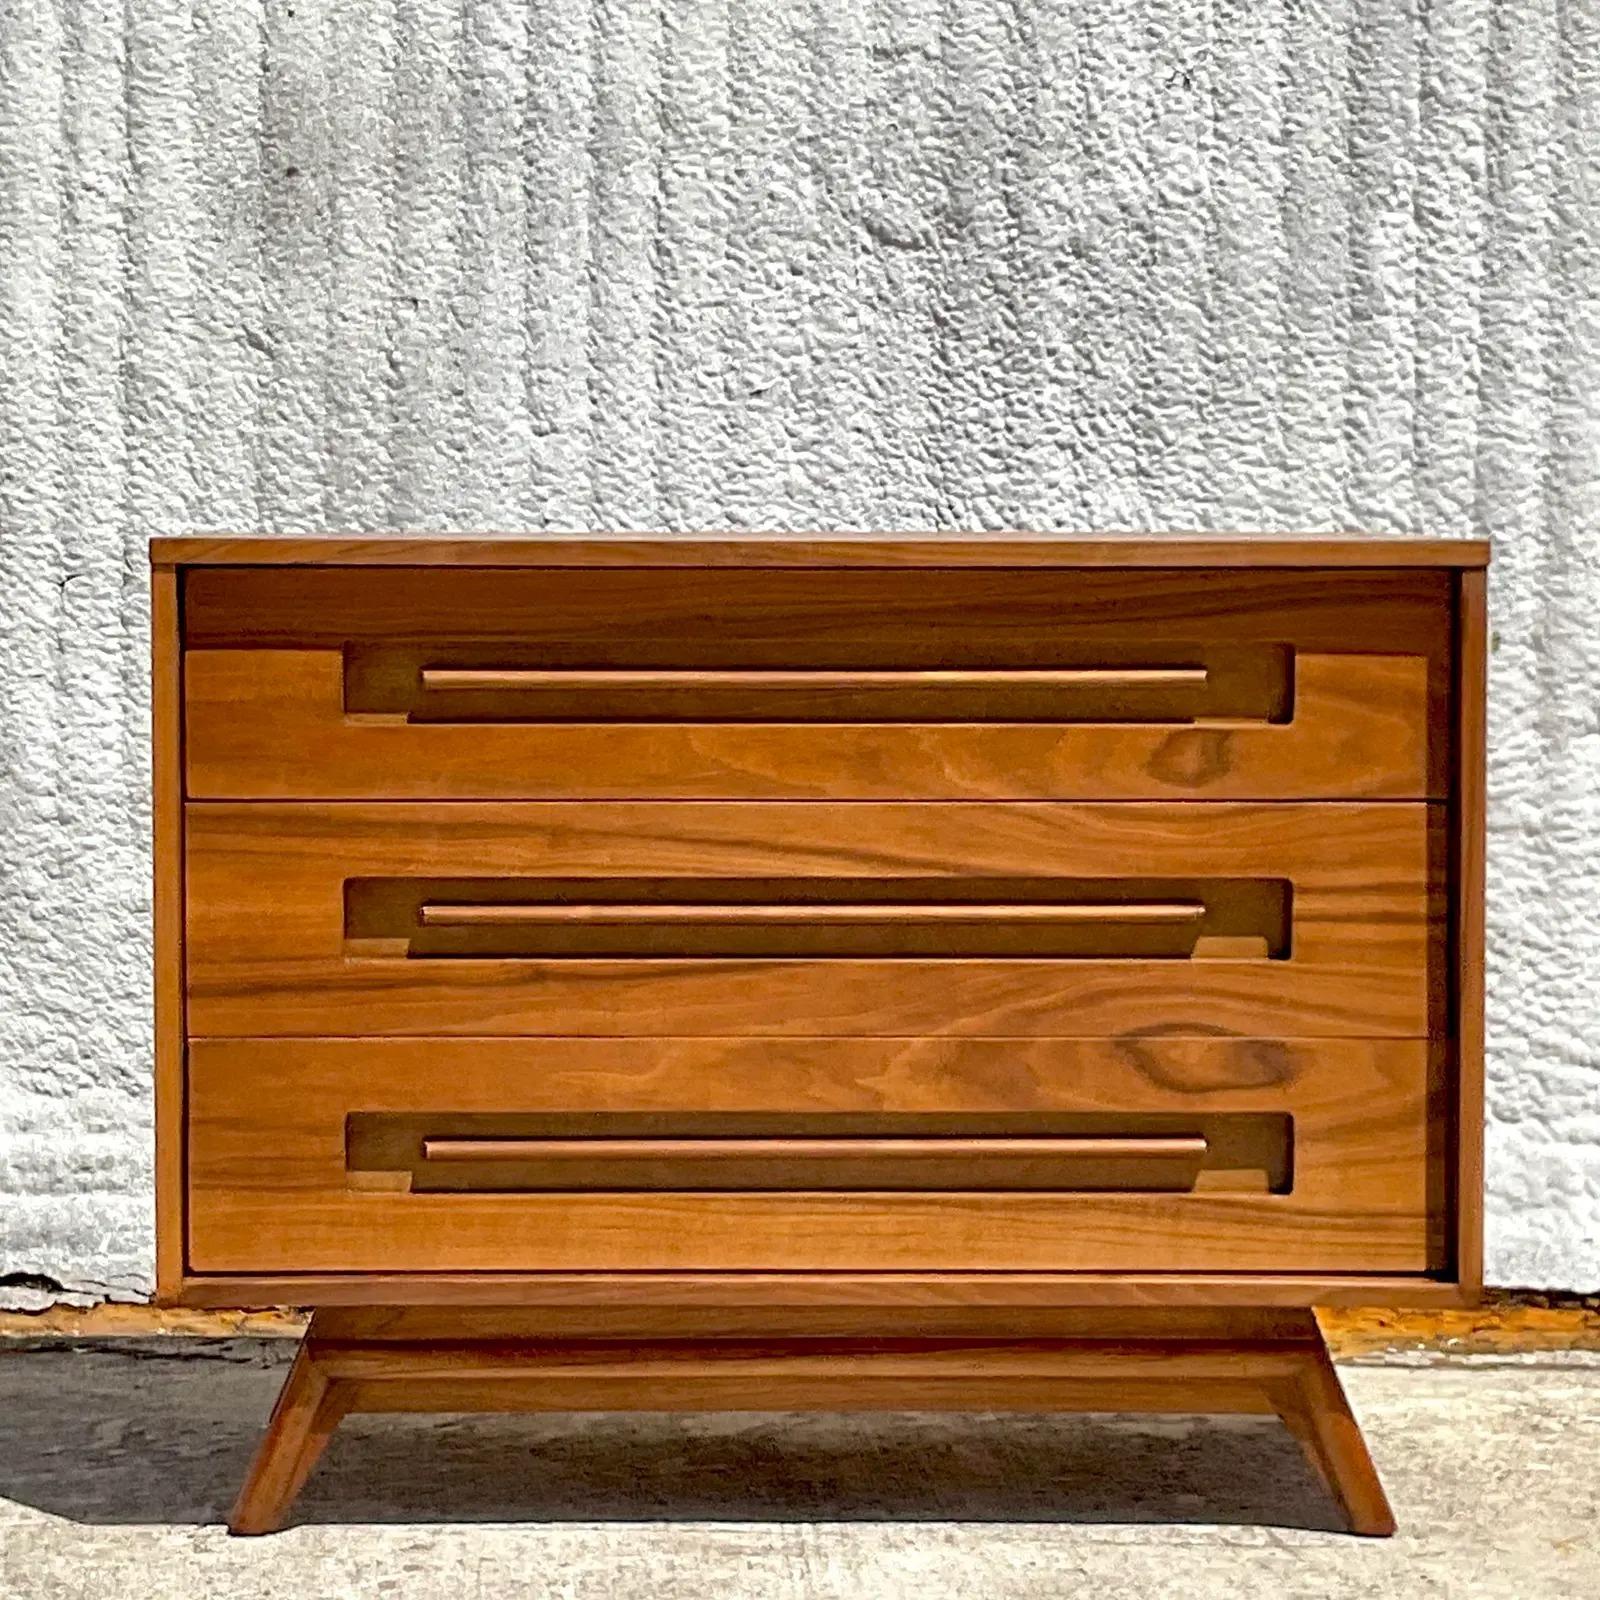 Fantastic vintage Midcentury chest of drawers. A small but handsome little guy. Made by the iconic Young manufacturing. Marked on the back. Acquired from a Palm Beach estate.